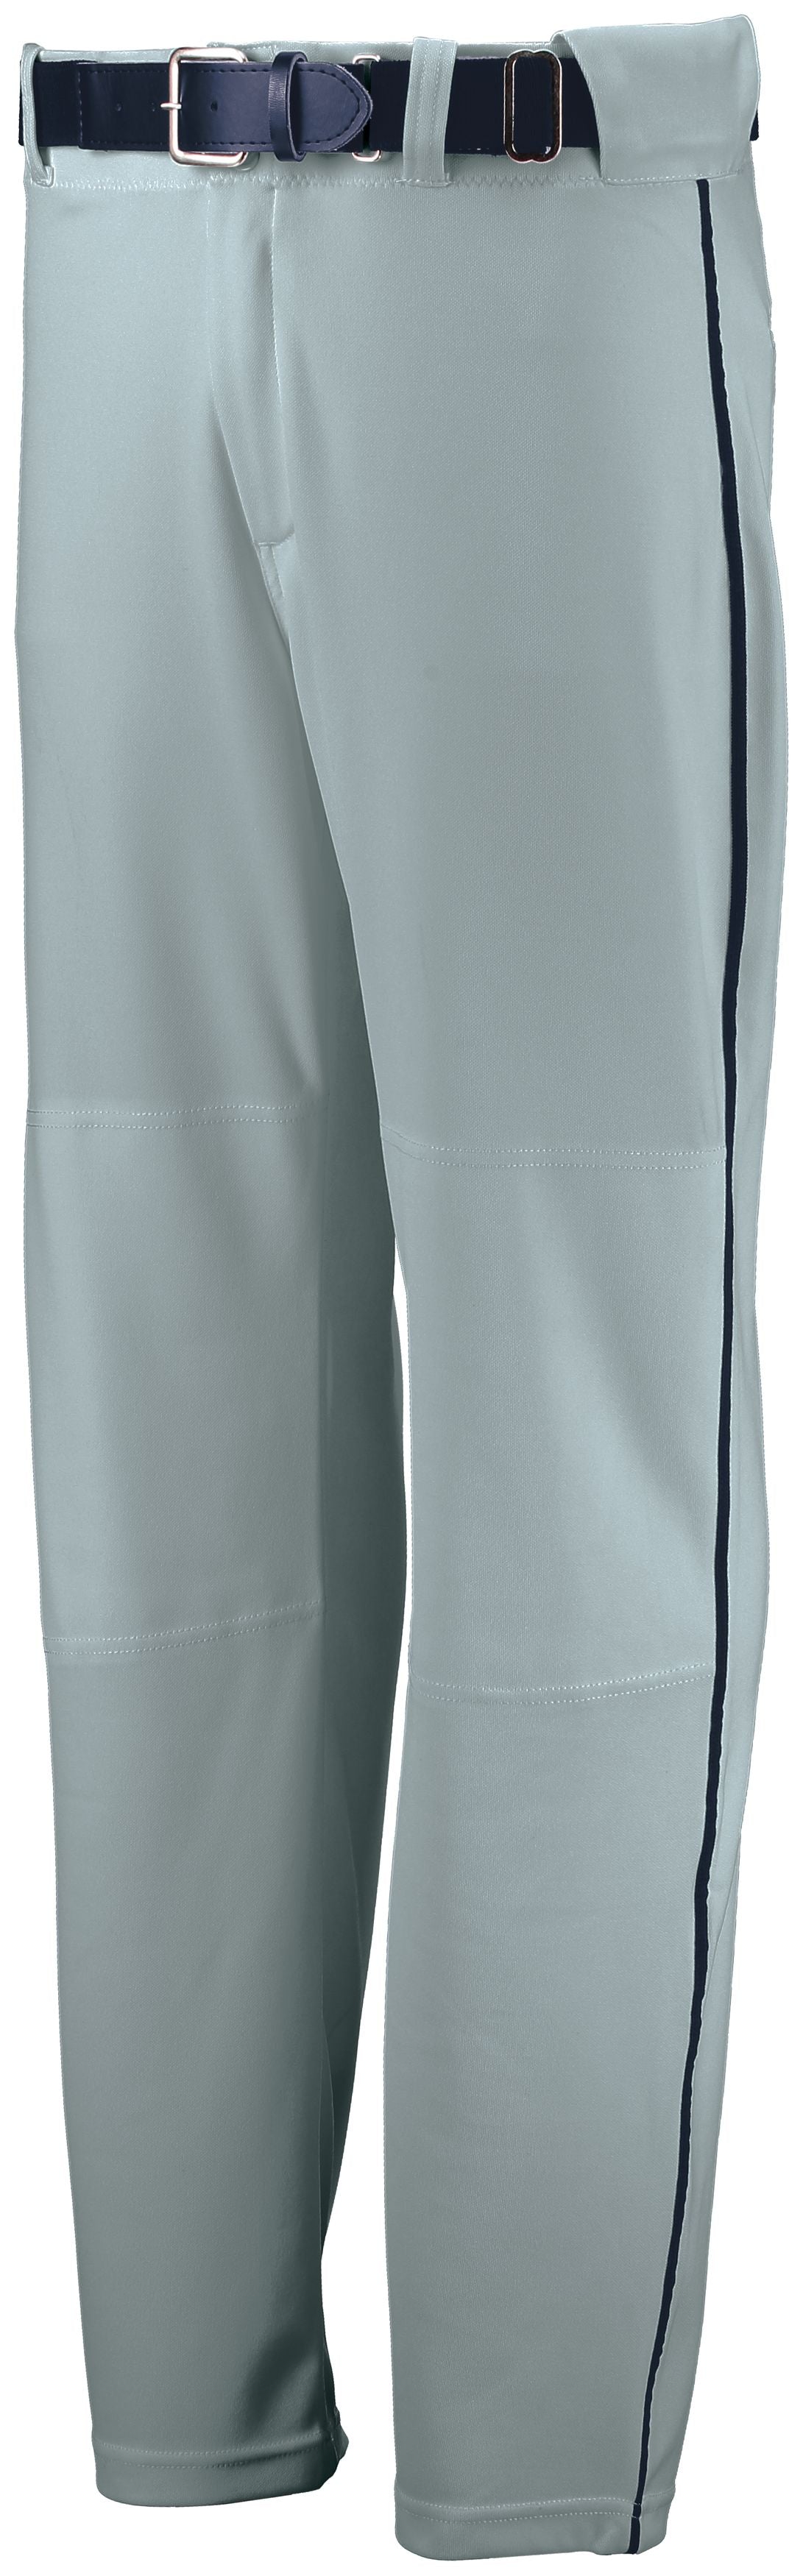 Russell Athletic Open Bottom Piped Pant in Baseball Grey/Navy  -Part of the Adult, Adult-Pants, Pants, Baseball, Russell-Athletic-Products, All-Sports, All-Sports-1 product lines at KanaleyCreations.com